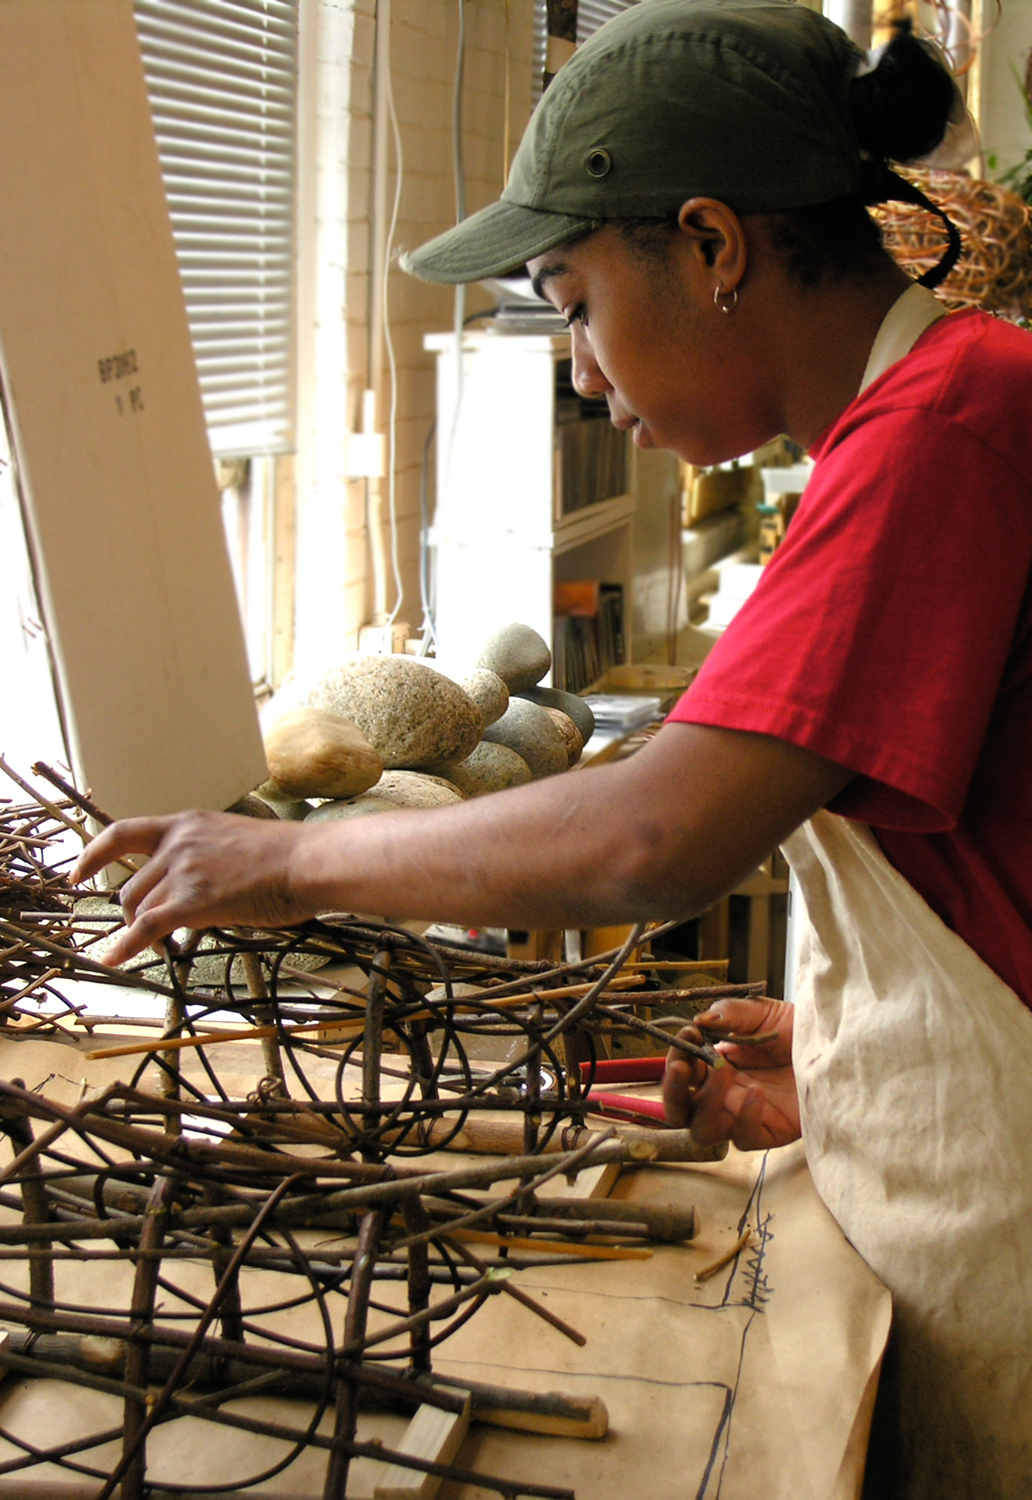  Weaving Thicket Sconces for the Marriot Hilton Head Spa in South Carolina. 